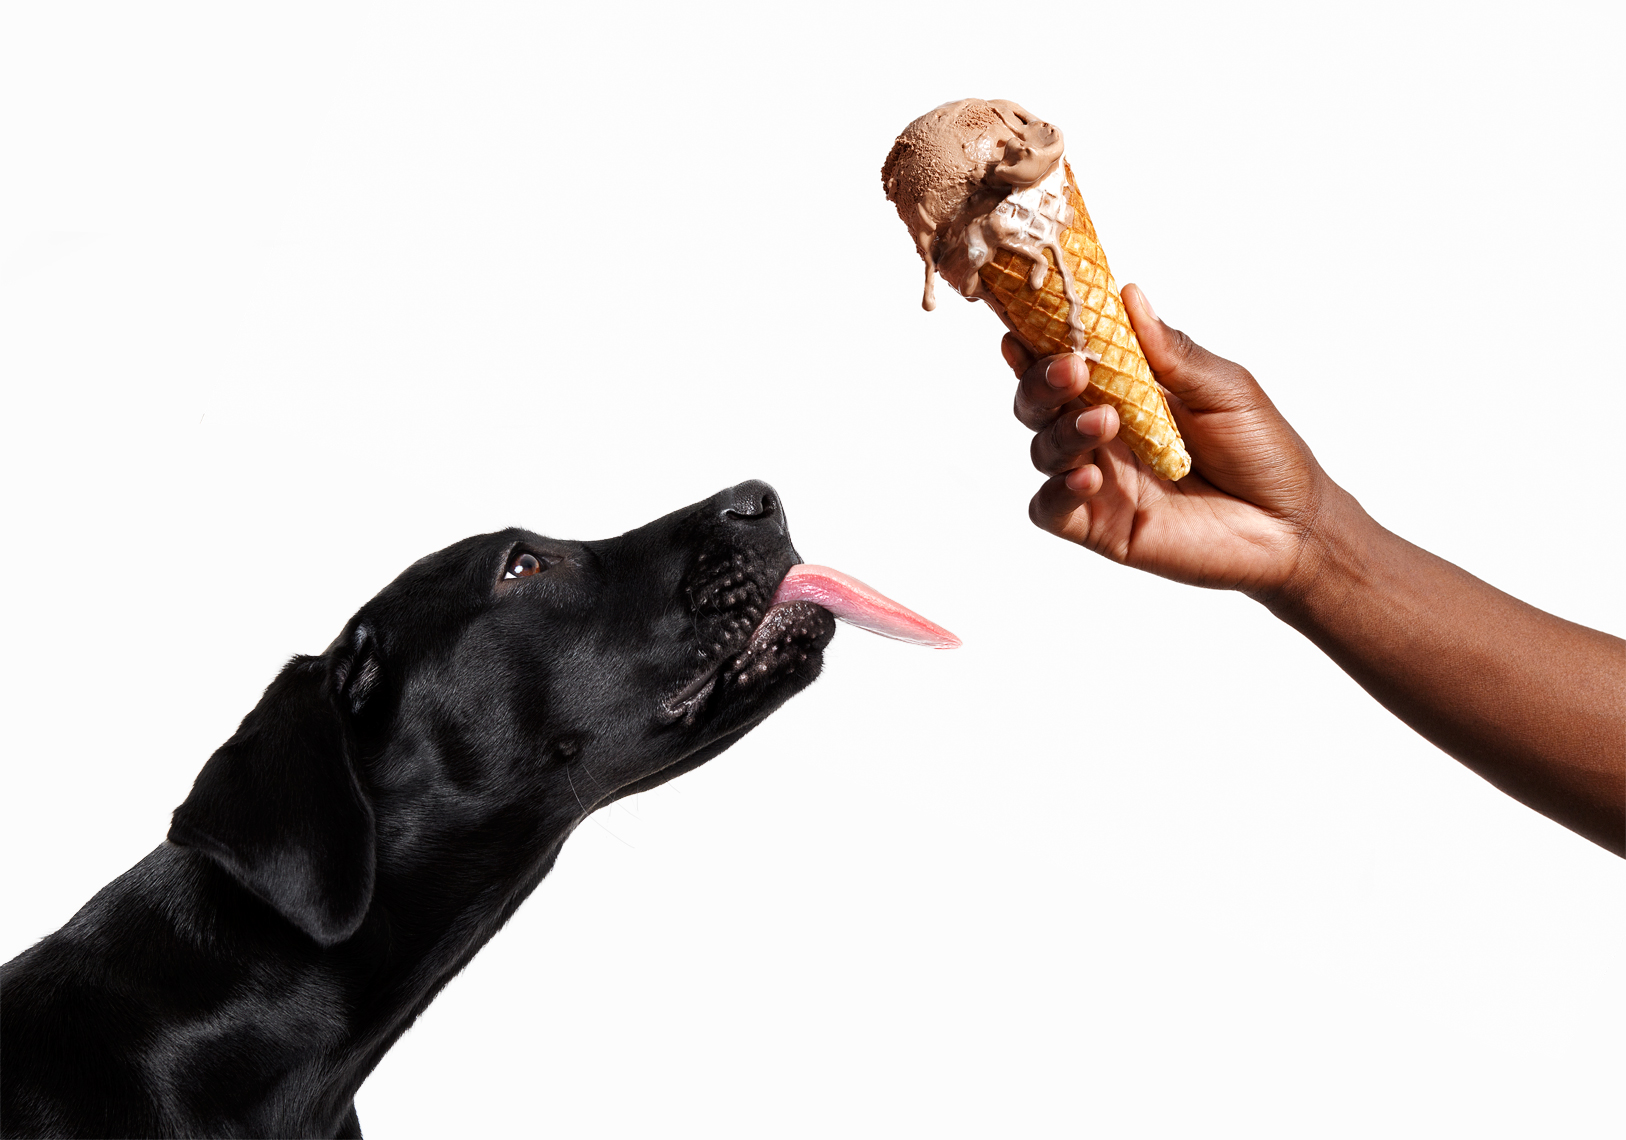 Dog waiting for ice cream with a man holding the cone